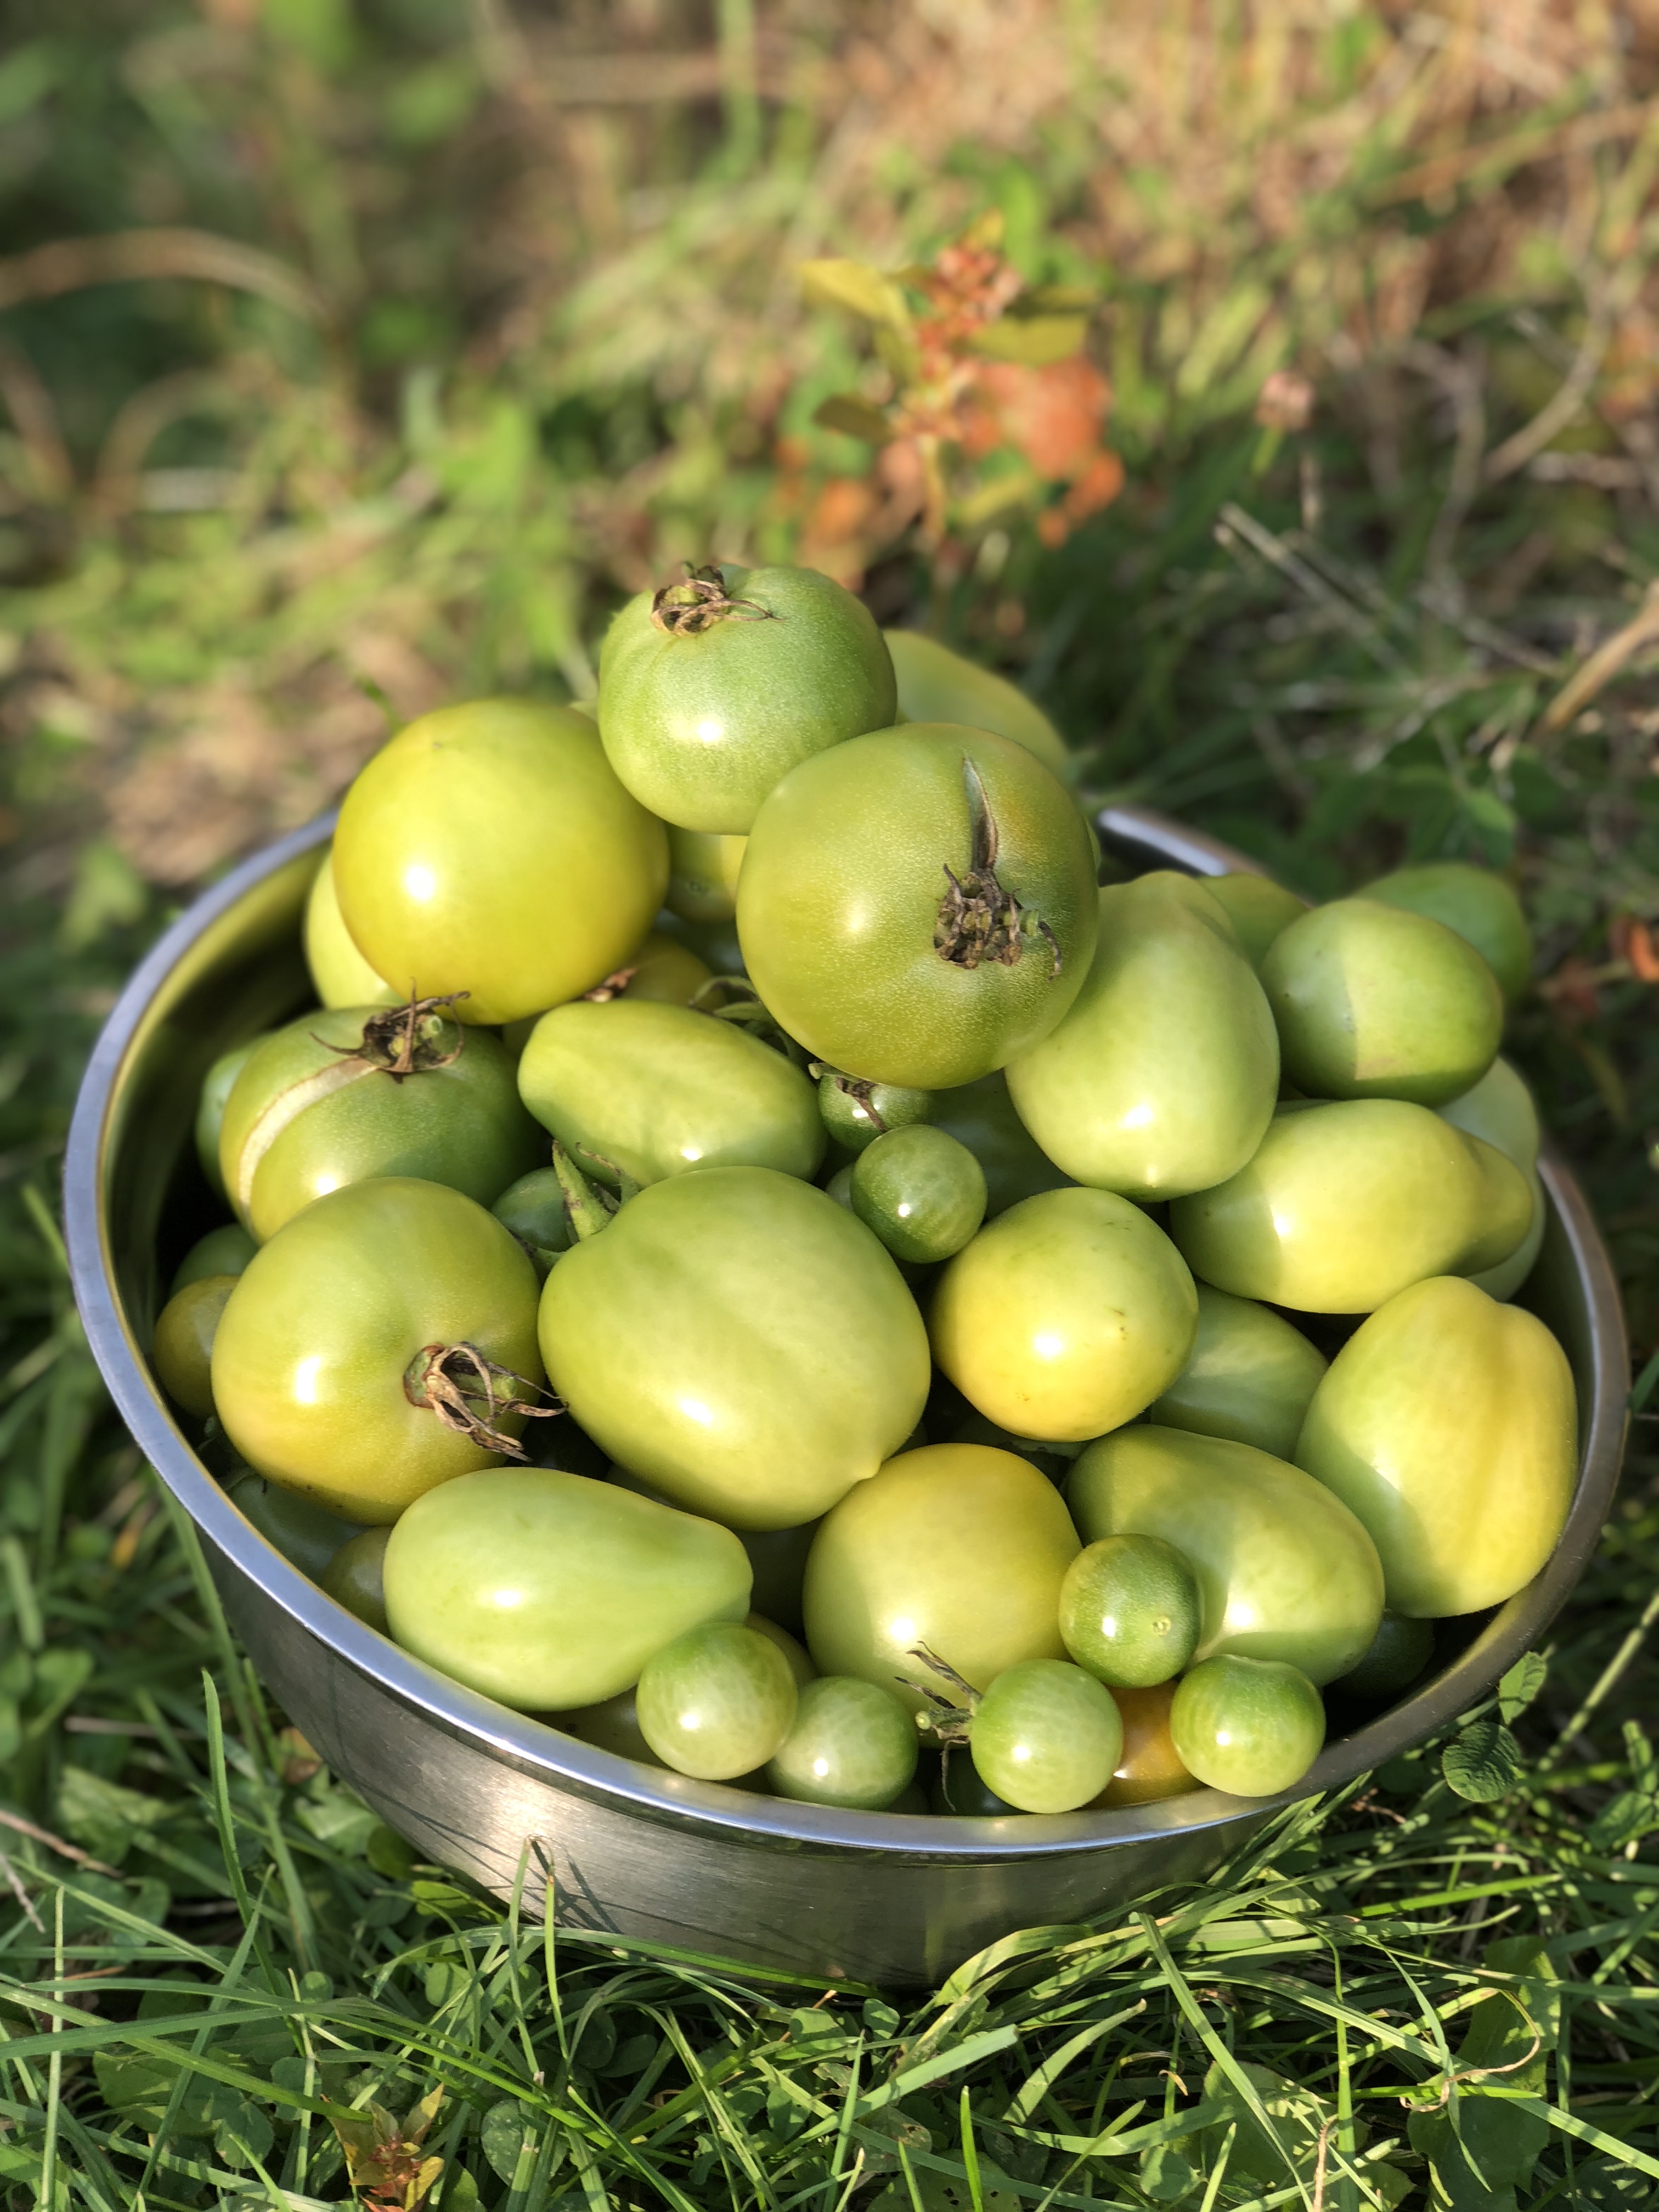 Green Tomato Ketchup – Never let a green tomato go to waste!